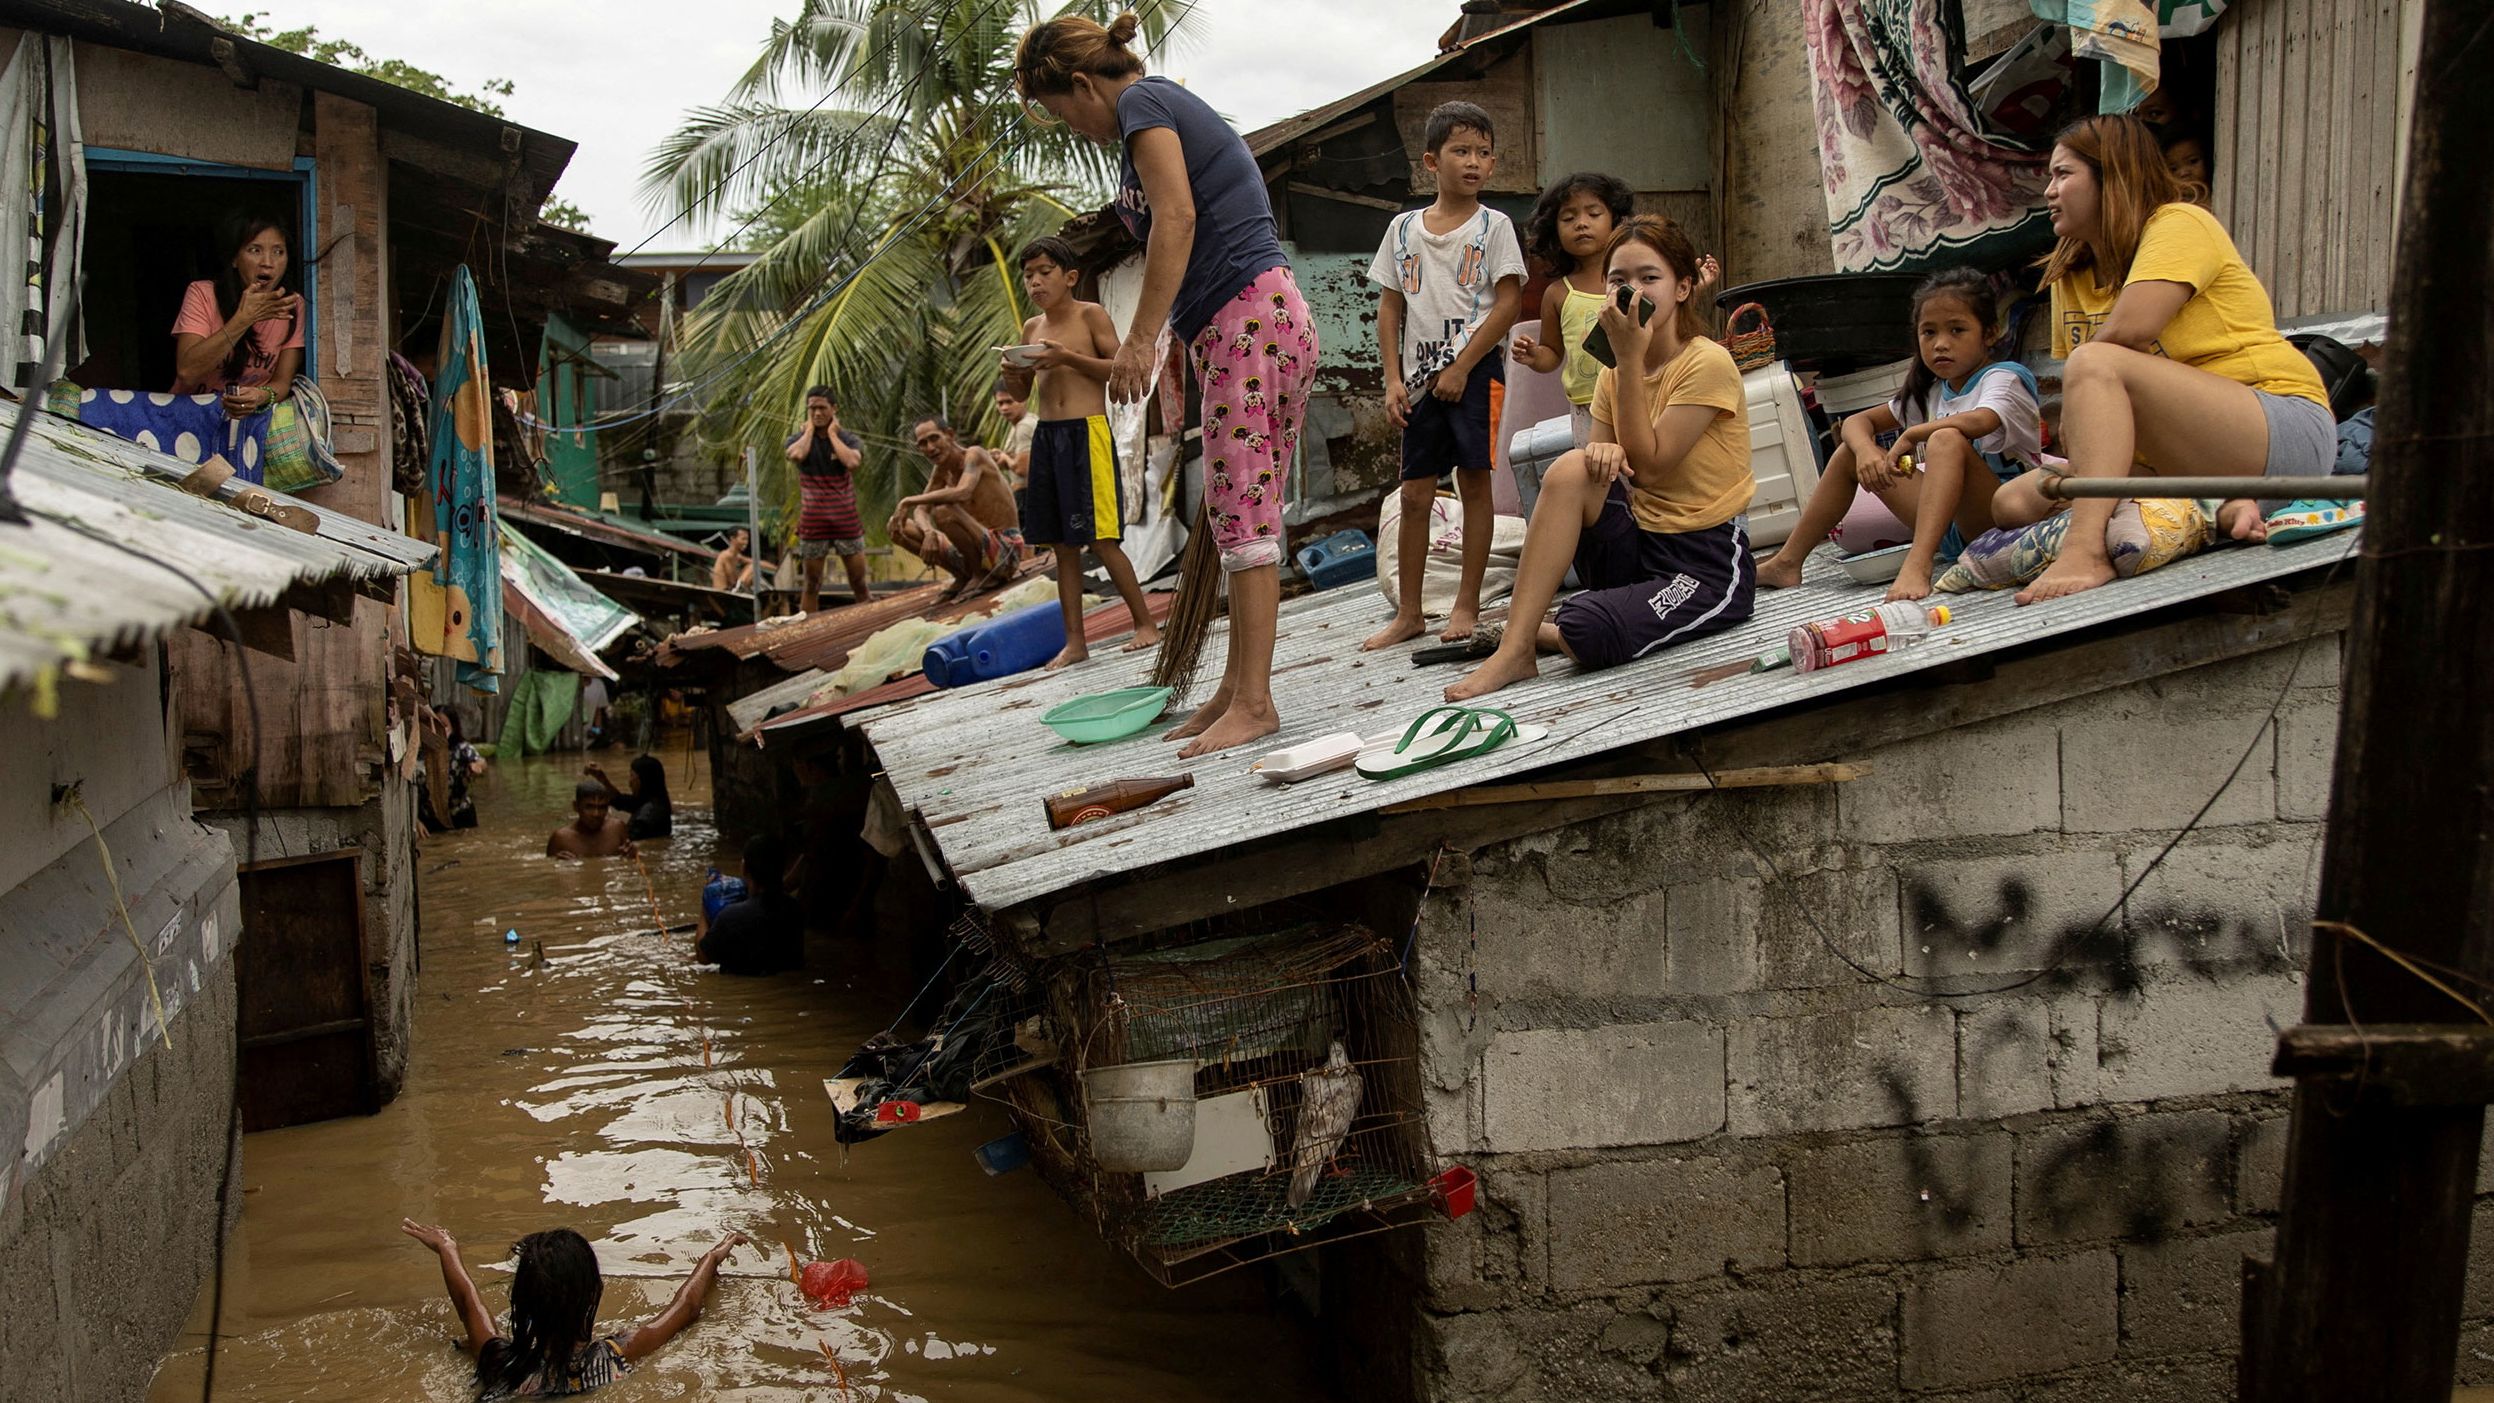 People look out from the roofs of their homes as they wait for flooding to subside in San Miguel, Philippines, on Monday, September 26. <a href="https://www.cnn.com/2022/09/26/asia/typhoon-karding-noru-philippines-deaths-intl-hnk/index.html" target="_blank">Typhoon Noru</a> made landfall the day before.